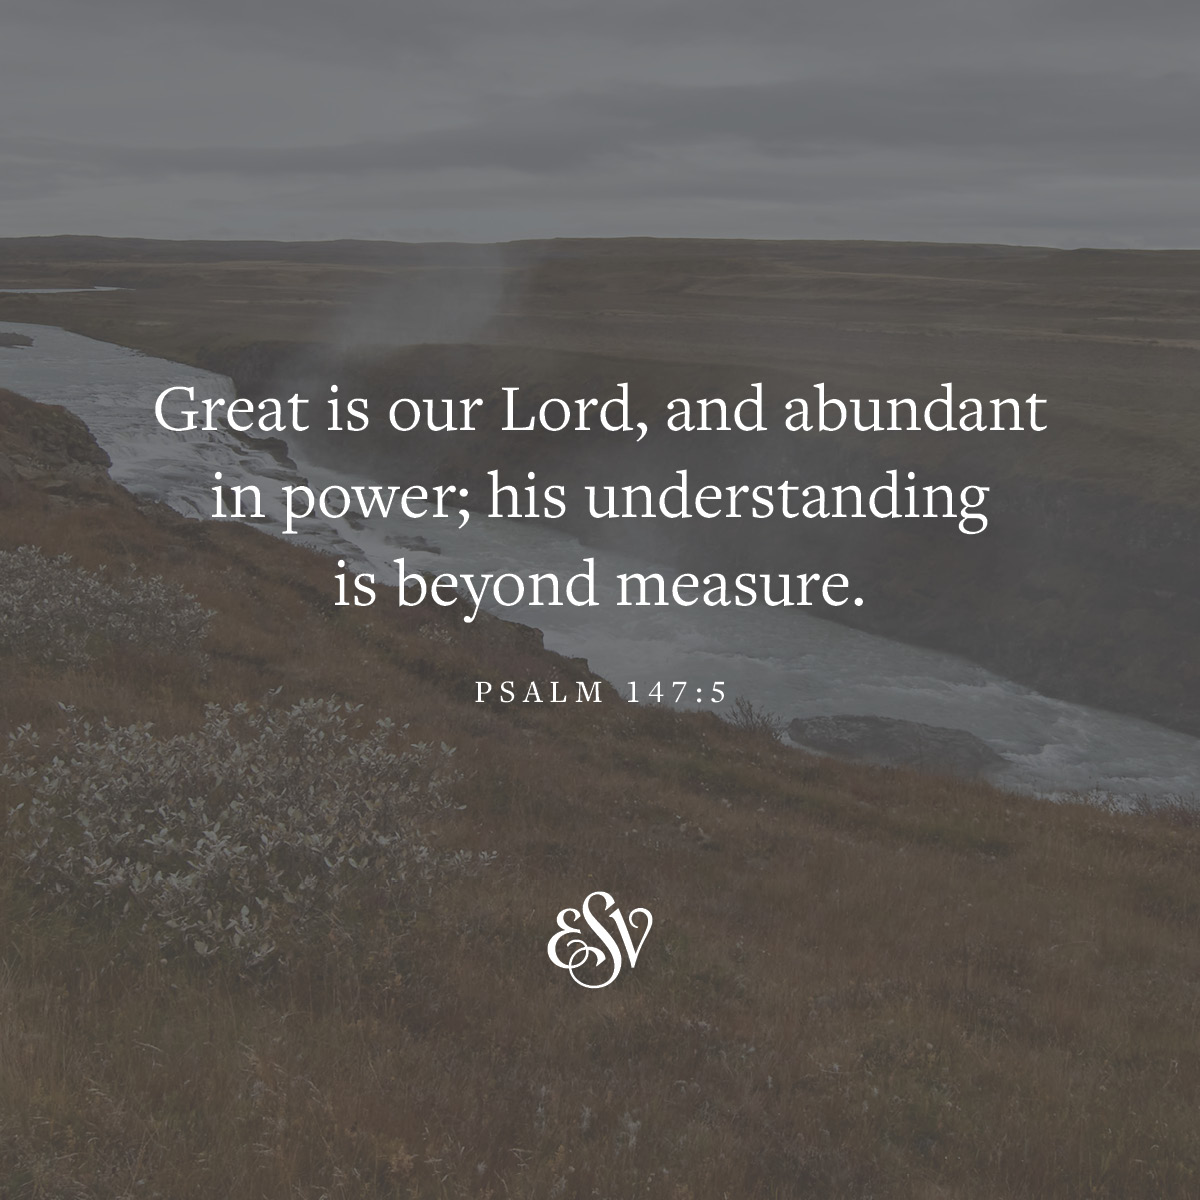 'Great is our Lord and abundant in power; his understanding is beyond measure. PSALM 147:5'